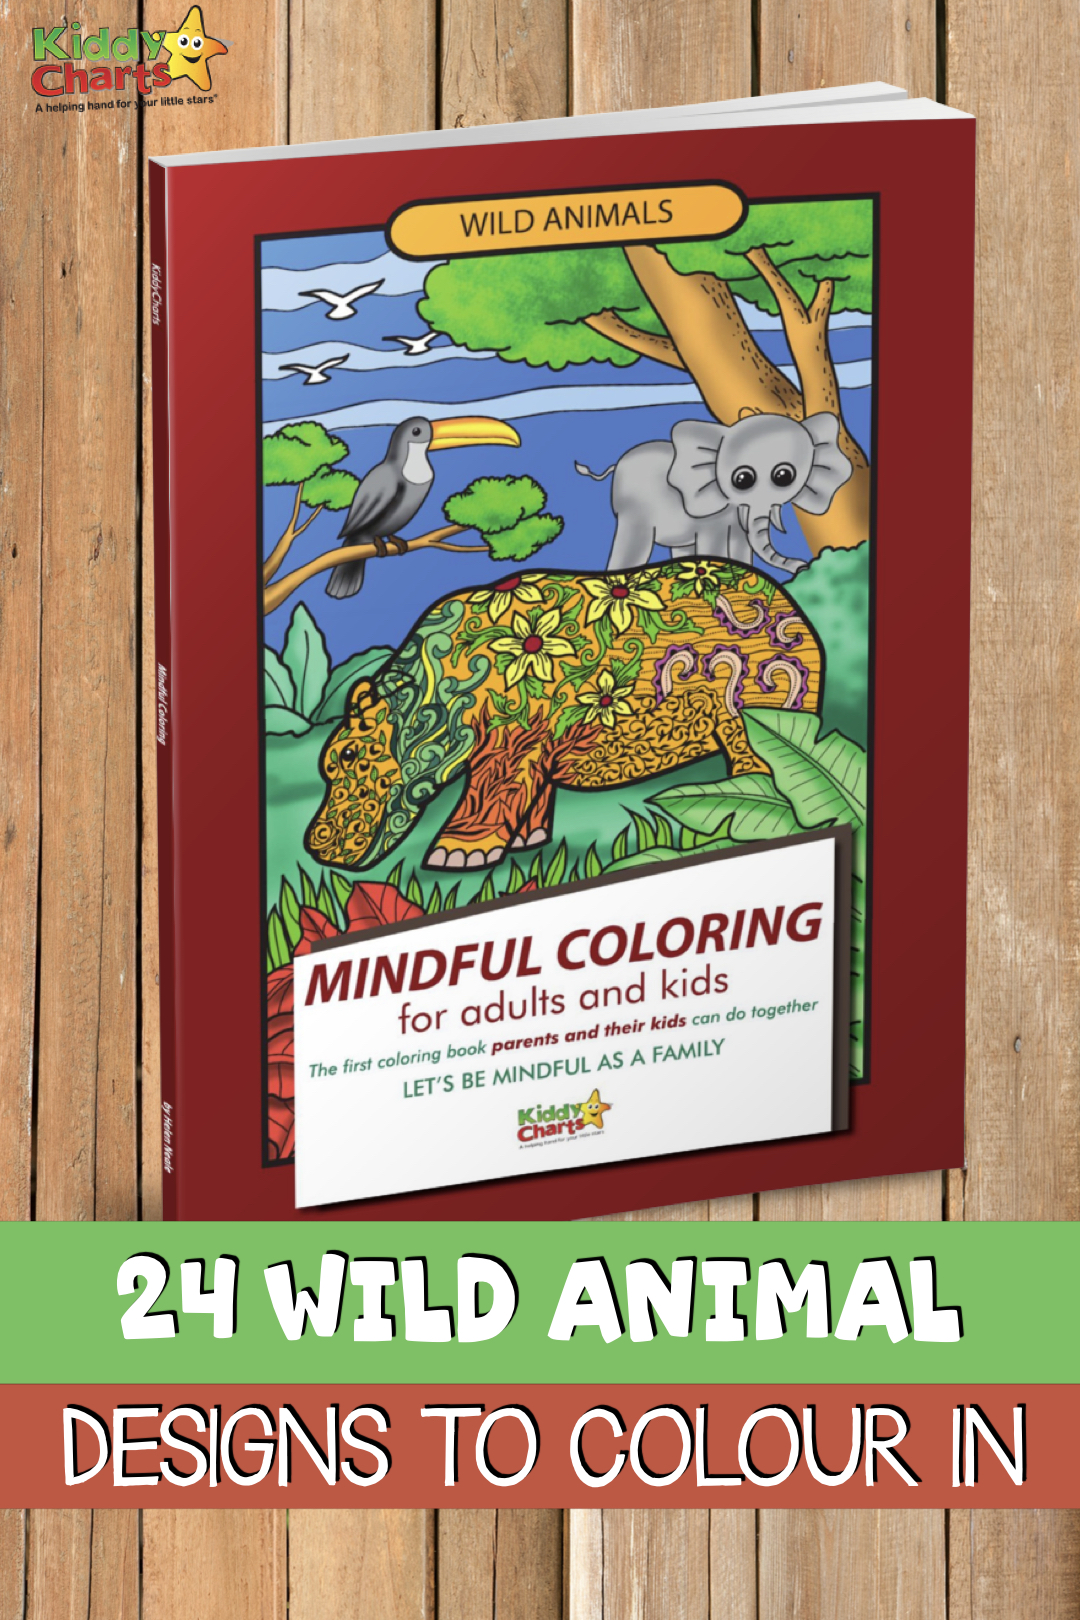 We have a mindful coloring book to BUY now and we've got some gorgeous samples from it to give away on the site. Check them and it out today. You've love these hippo coloring pics. AND the other 11 different animals in the book #coloring #colouring #animals #kids #adultcoloring #kidscoloring #hippos #nature #coloringbook #coloringbooks #freestuff